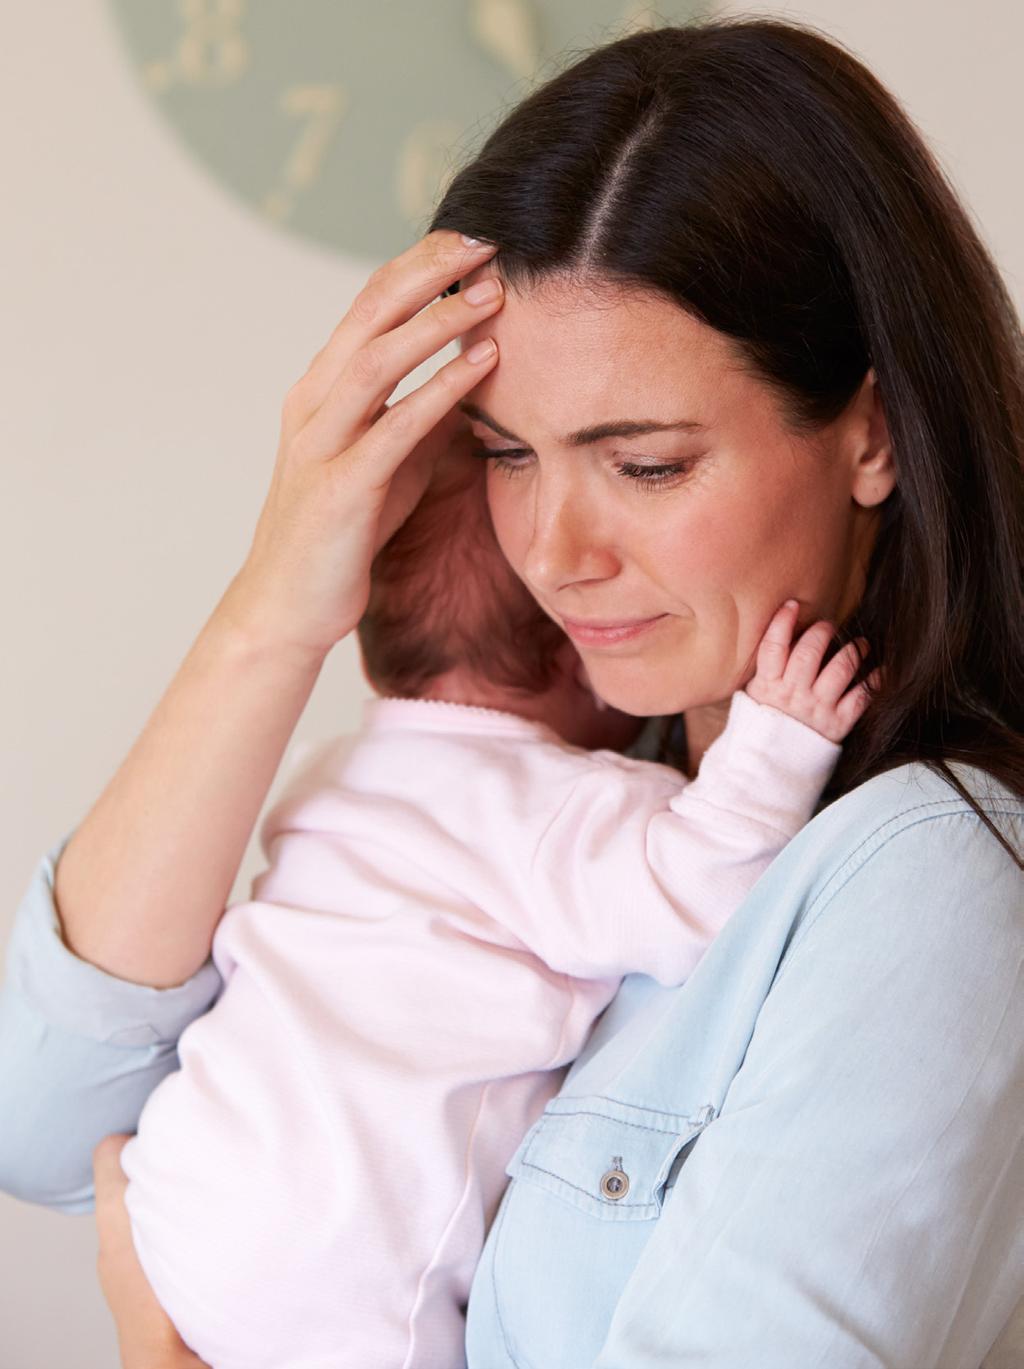 Understanding Perinatal Mood Disorders (PMD) Postpartum Depression and Beyond Northwestern Medicine Central DuPage Hospital 25 North Winfield Road Winfield, Illinois 60190 630.933.